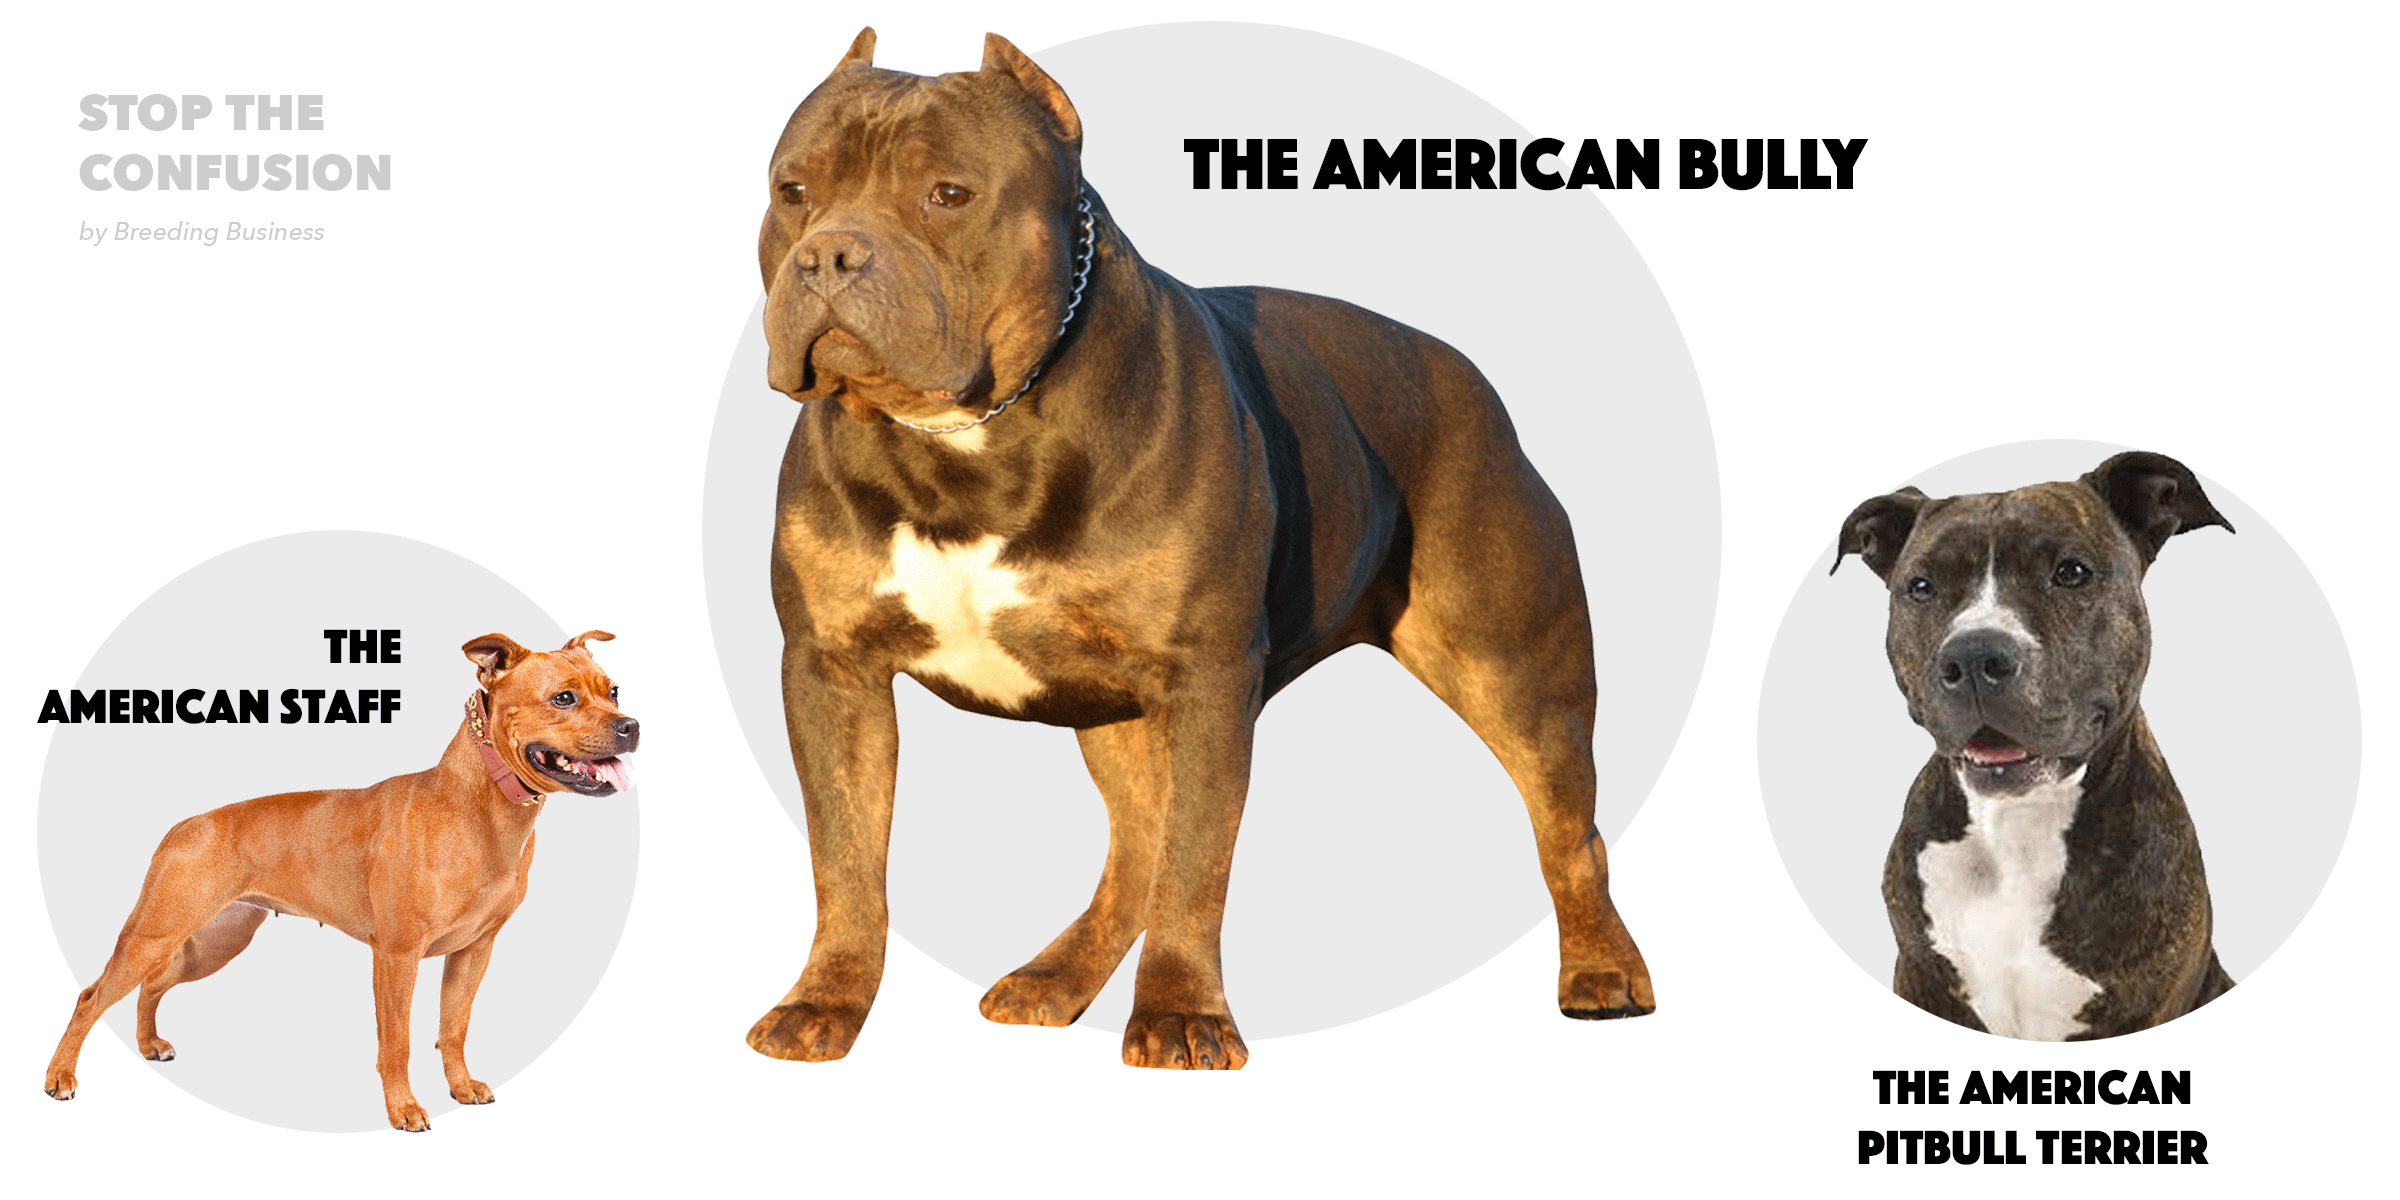 What Is The American Bully? Here Is The 